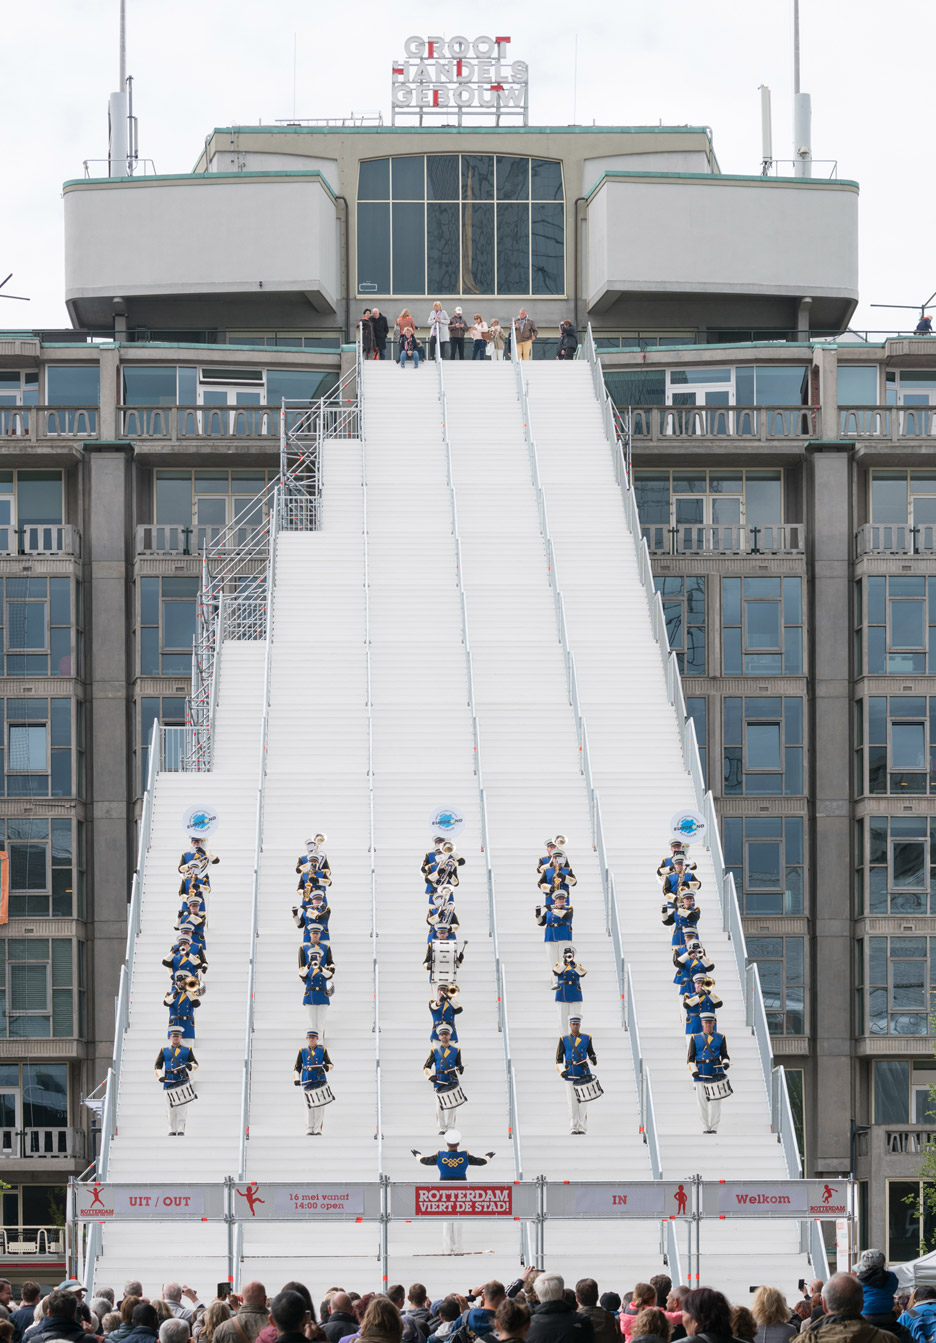 MVRDV completes The Stairs, a giant scaffolding staircase in Rotterdam city centre